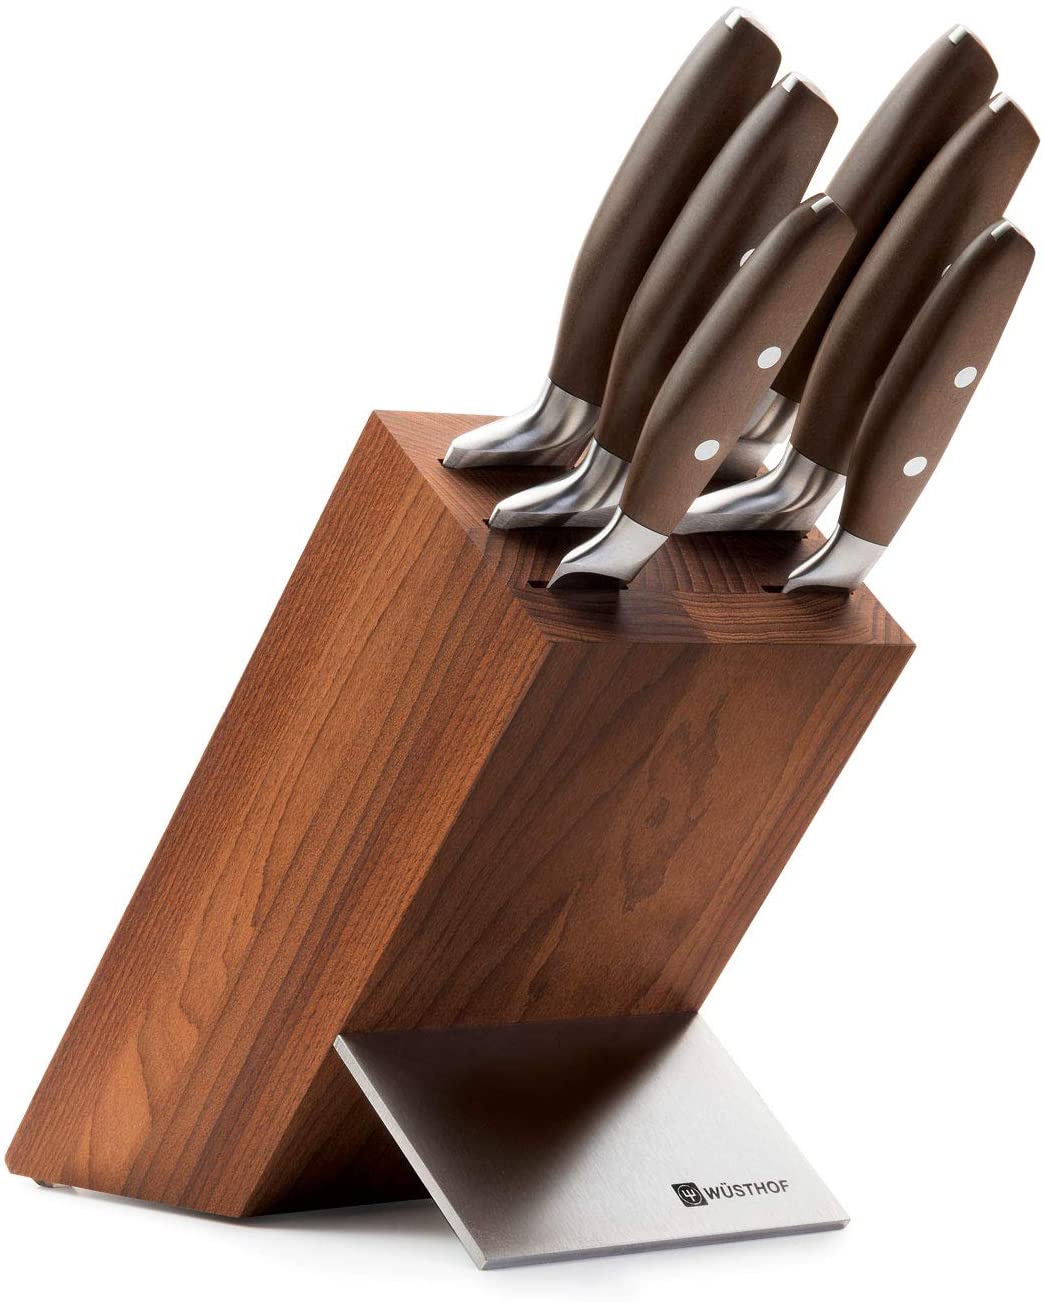 Wusthof Wüsthof Epicure 9854 Knife Block with 6 Chef\'s Knives, Kitchen Knife Set, Beech, Stainless Steel, Very Sharp Knives